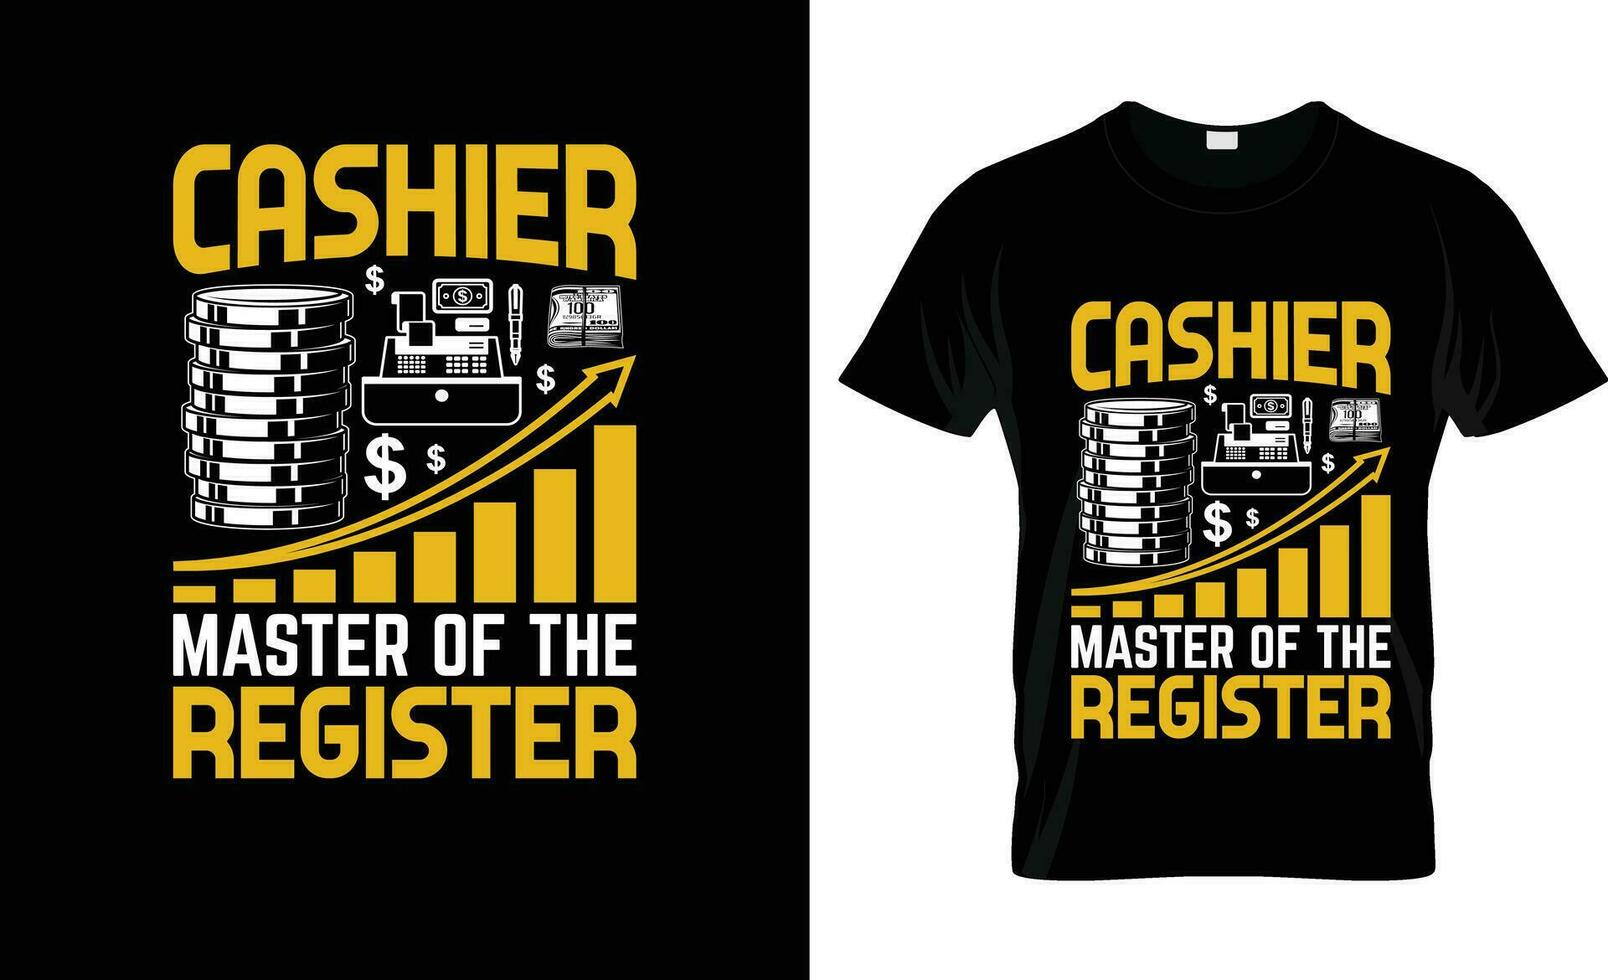 cashier master of the register colorful Graphic T-Shirt,  t-shirt print mockup vector